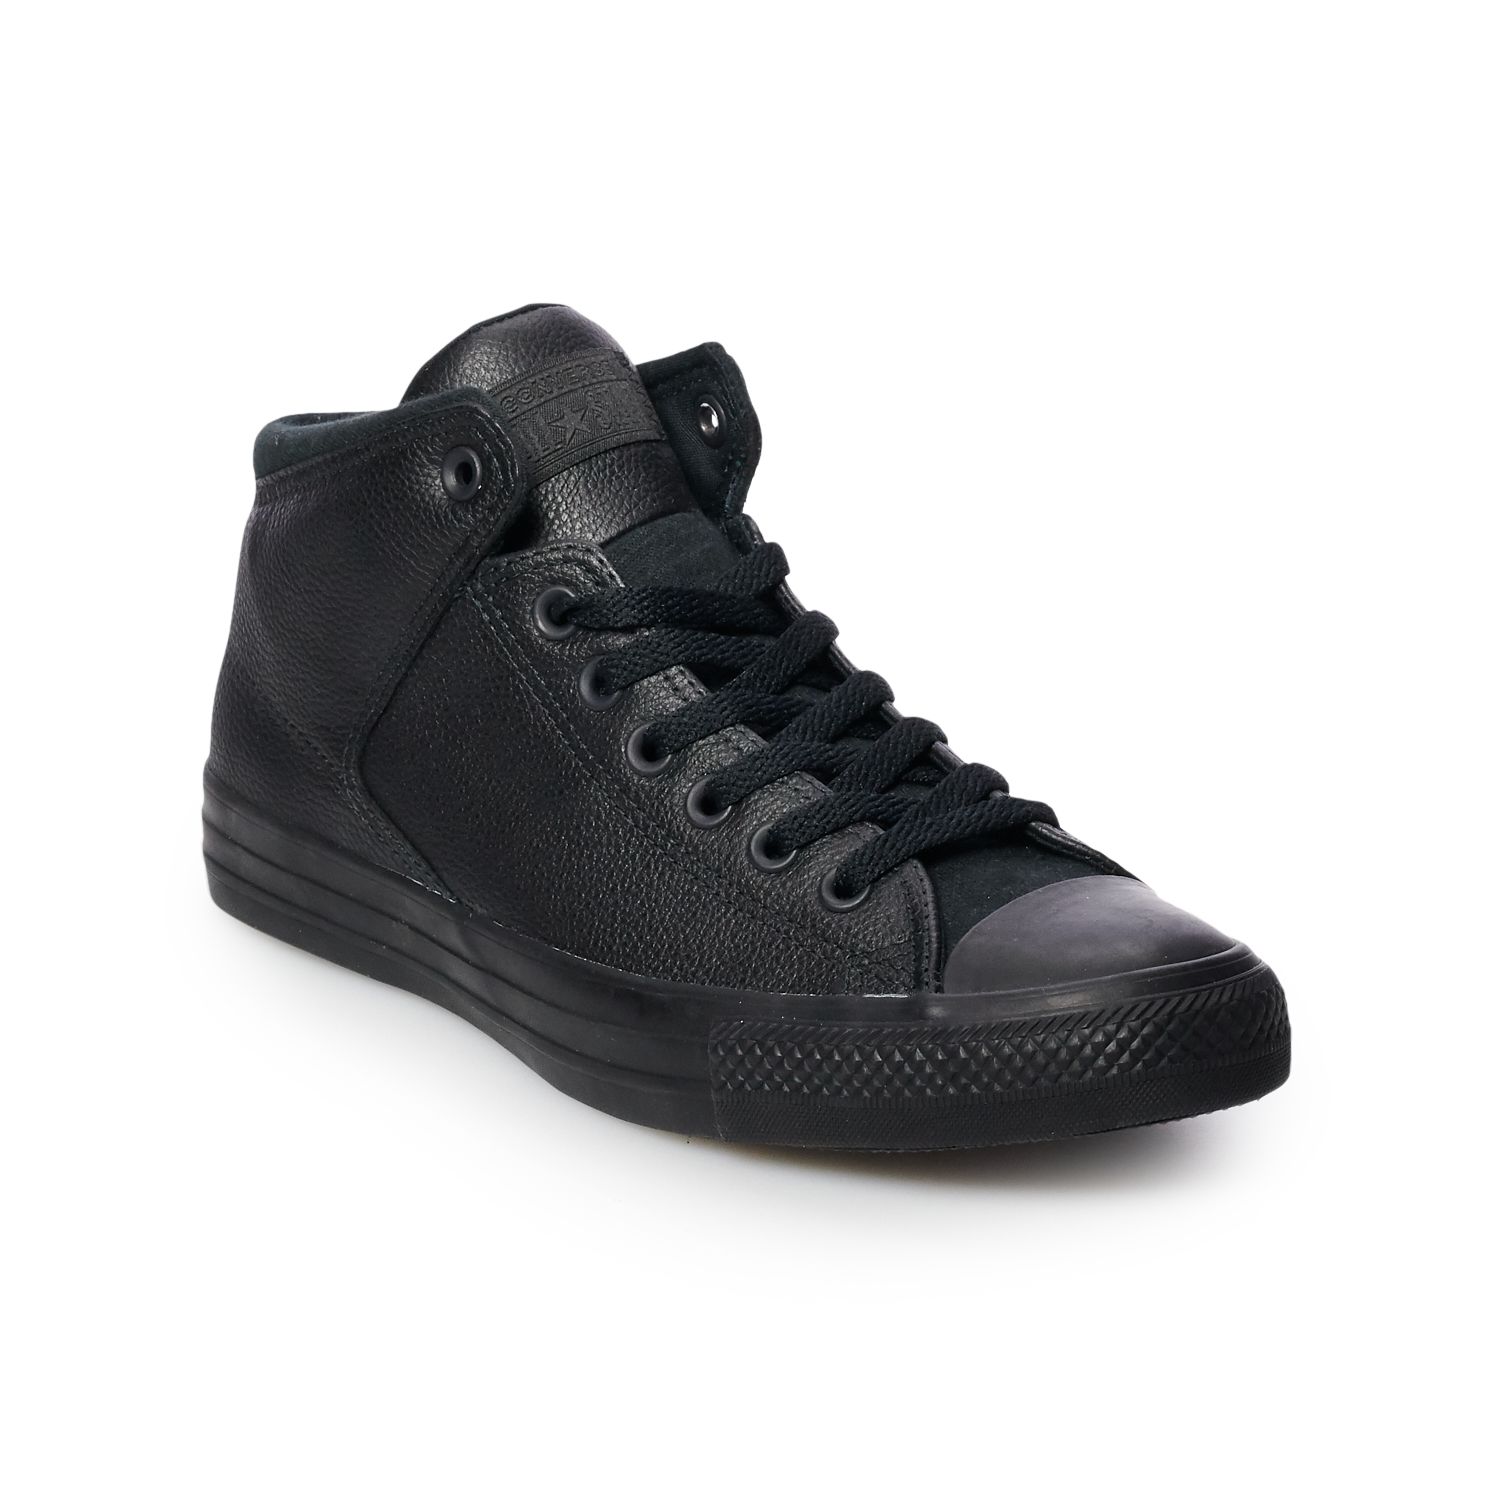 converse chuck taylor all star high street leather